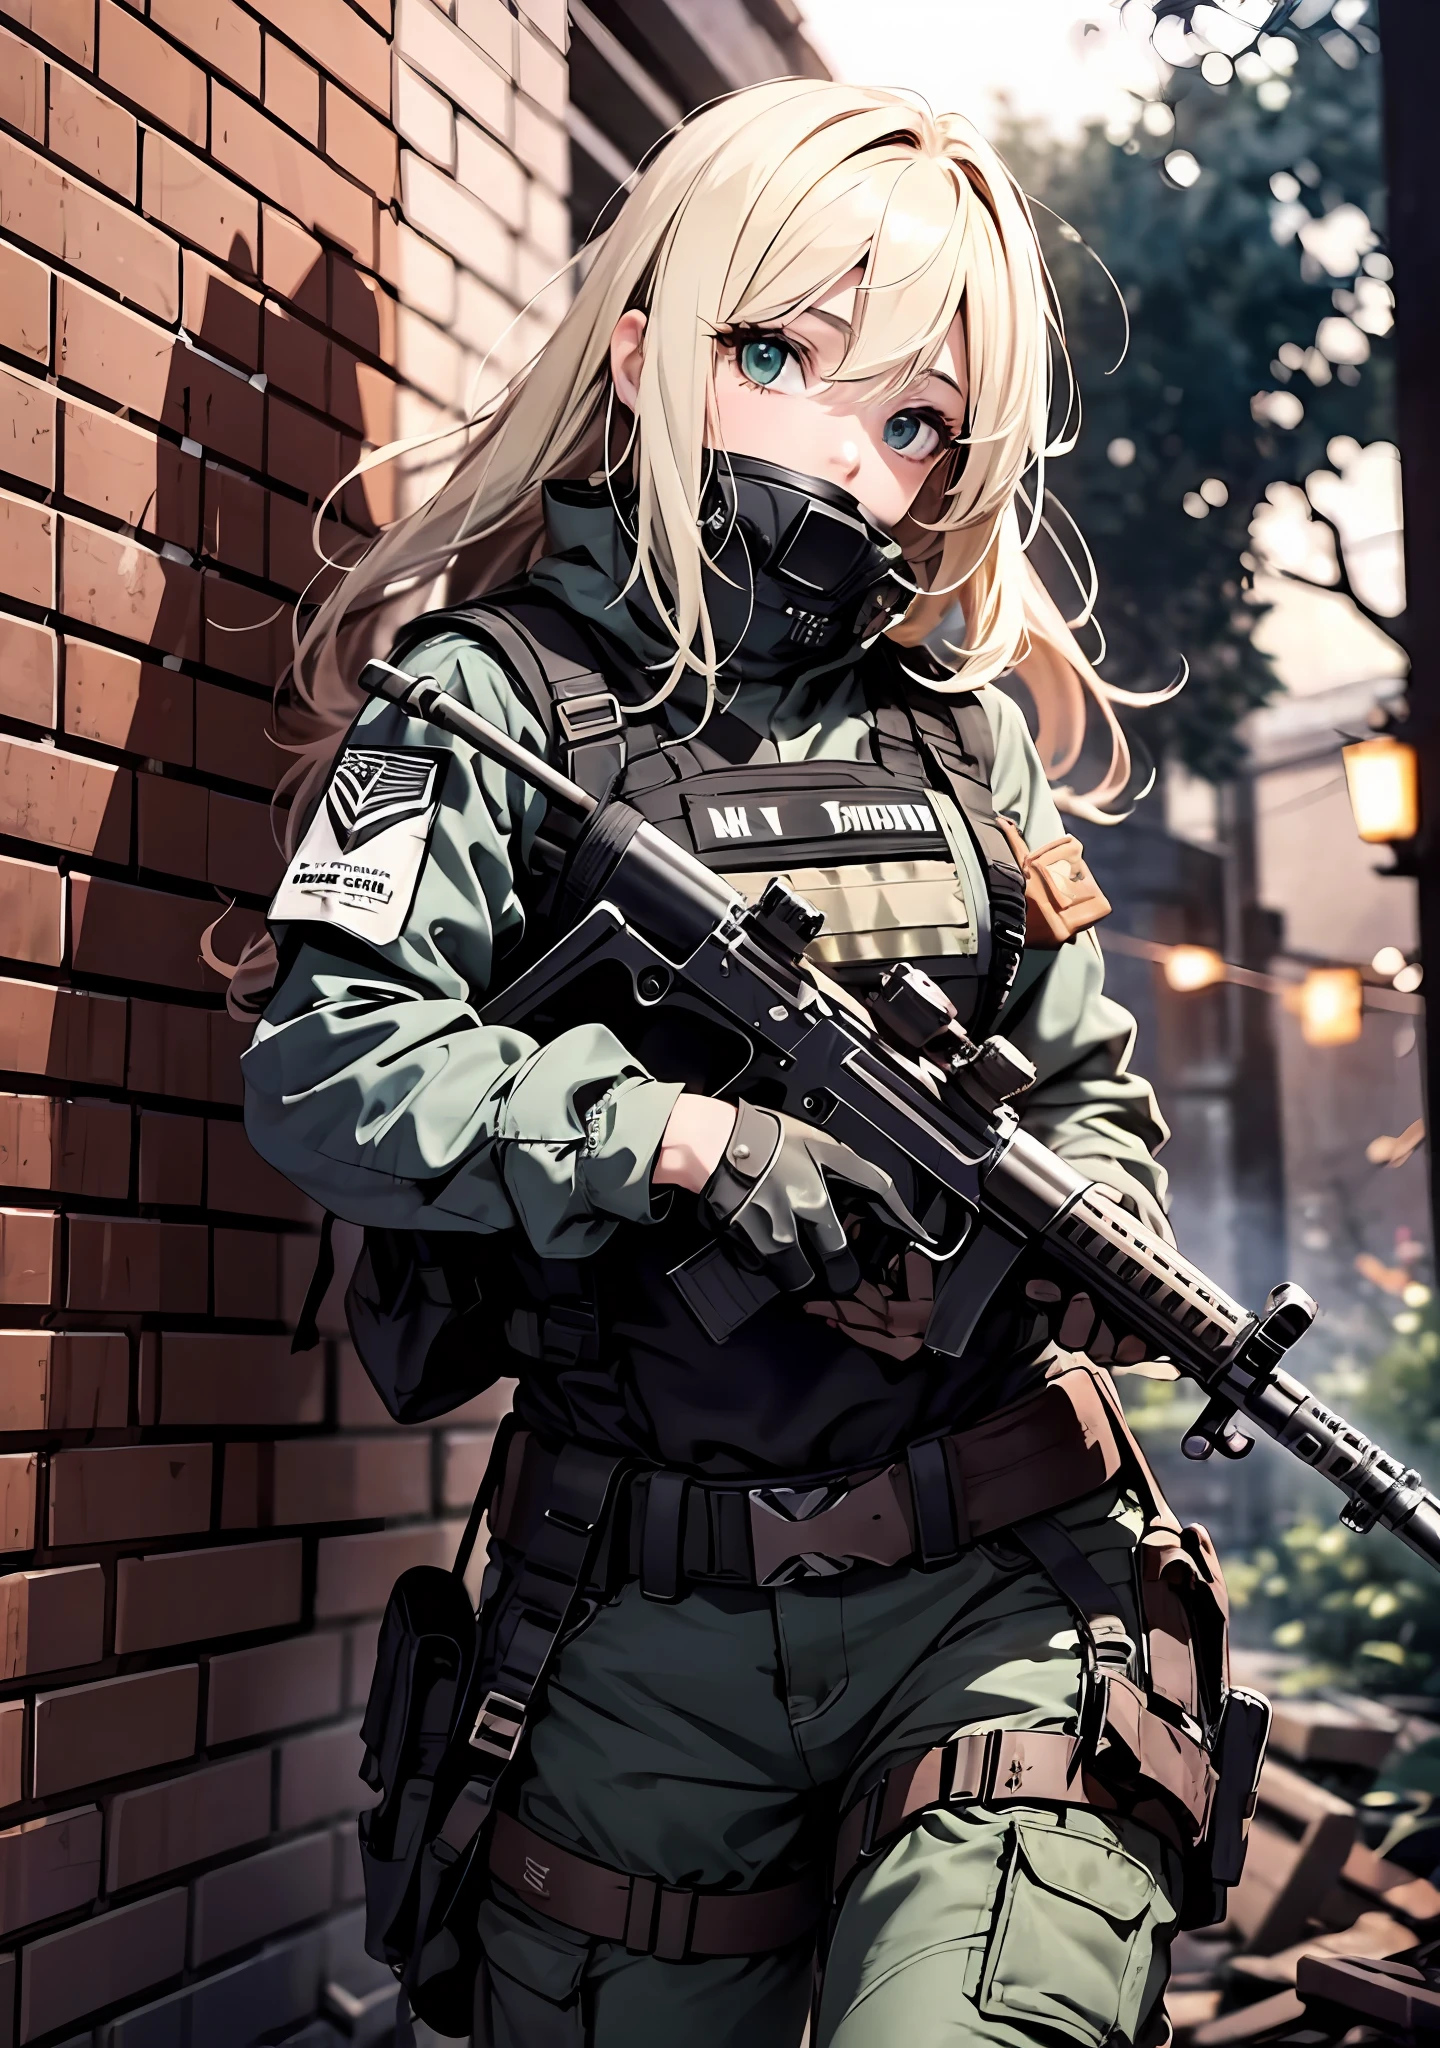 {{Masterpiece, top quality, highly detailed CG, unified 8k wallpaper, movie lighting, lens flare}}, 1 girl holding a rifle through the wall, wide view, thick body, long blonde hair soaring in the wind, green eyes, (holding a weapon, holding a rifle, aiming, aiming: 1.4), gun, h&k hk416, carbine, open fire, rubble, ruins of conflict areas, plumes, nitric smoke, blast waves, Flying bullets, sniper, 35mm, f/1.8, night